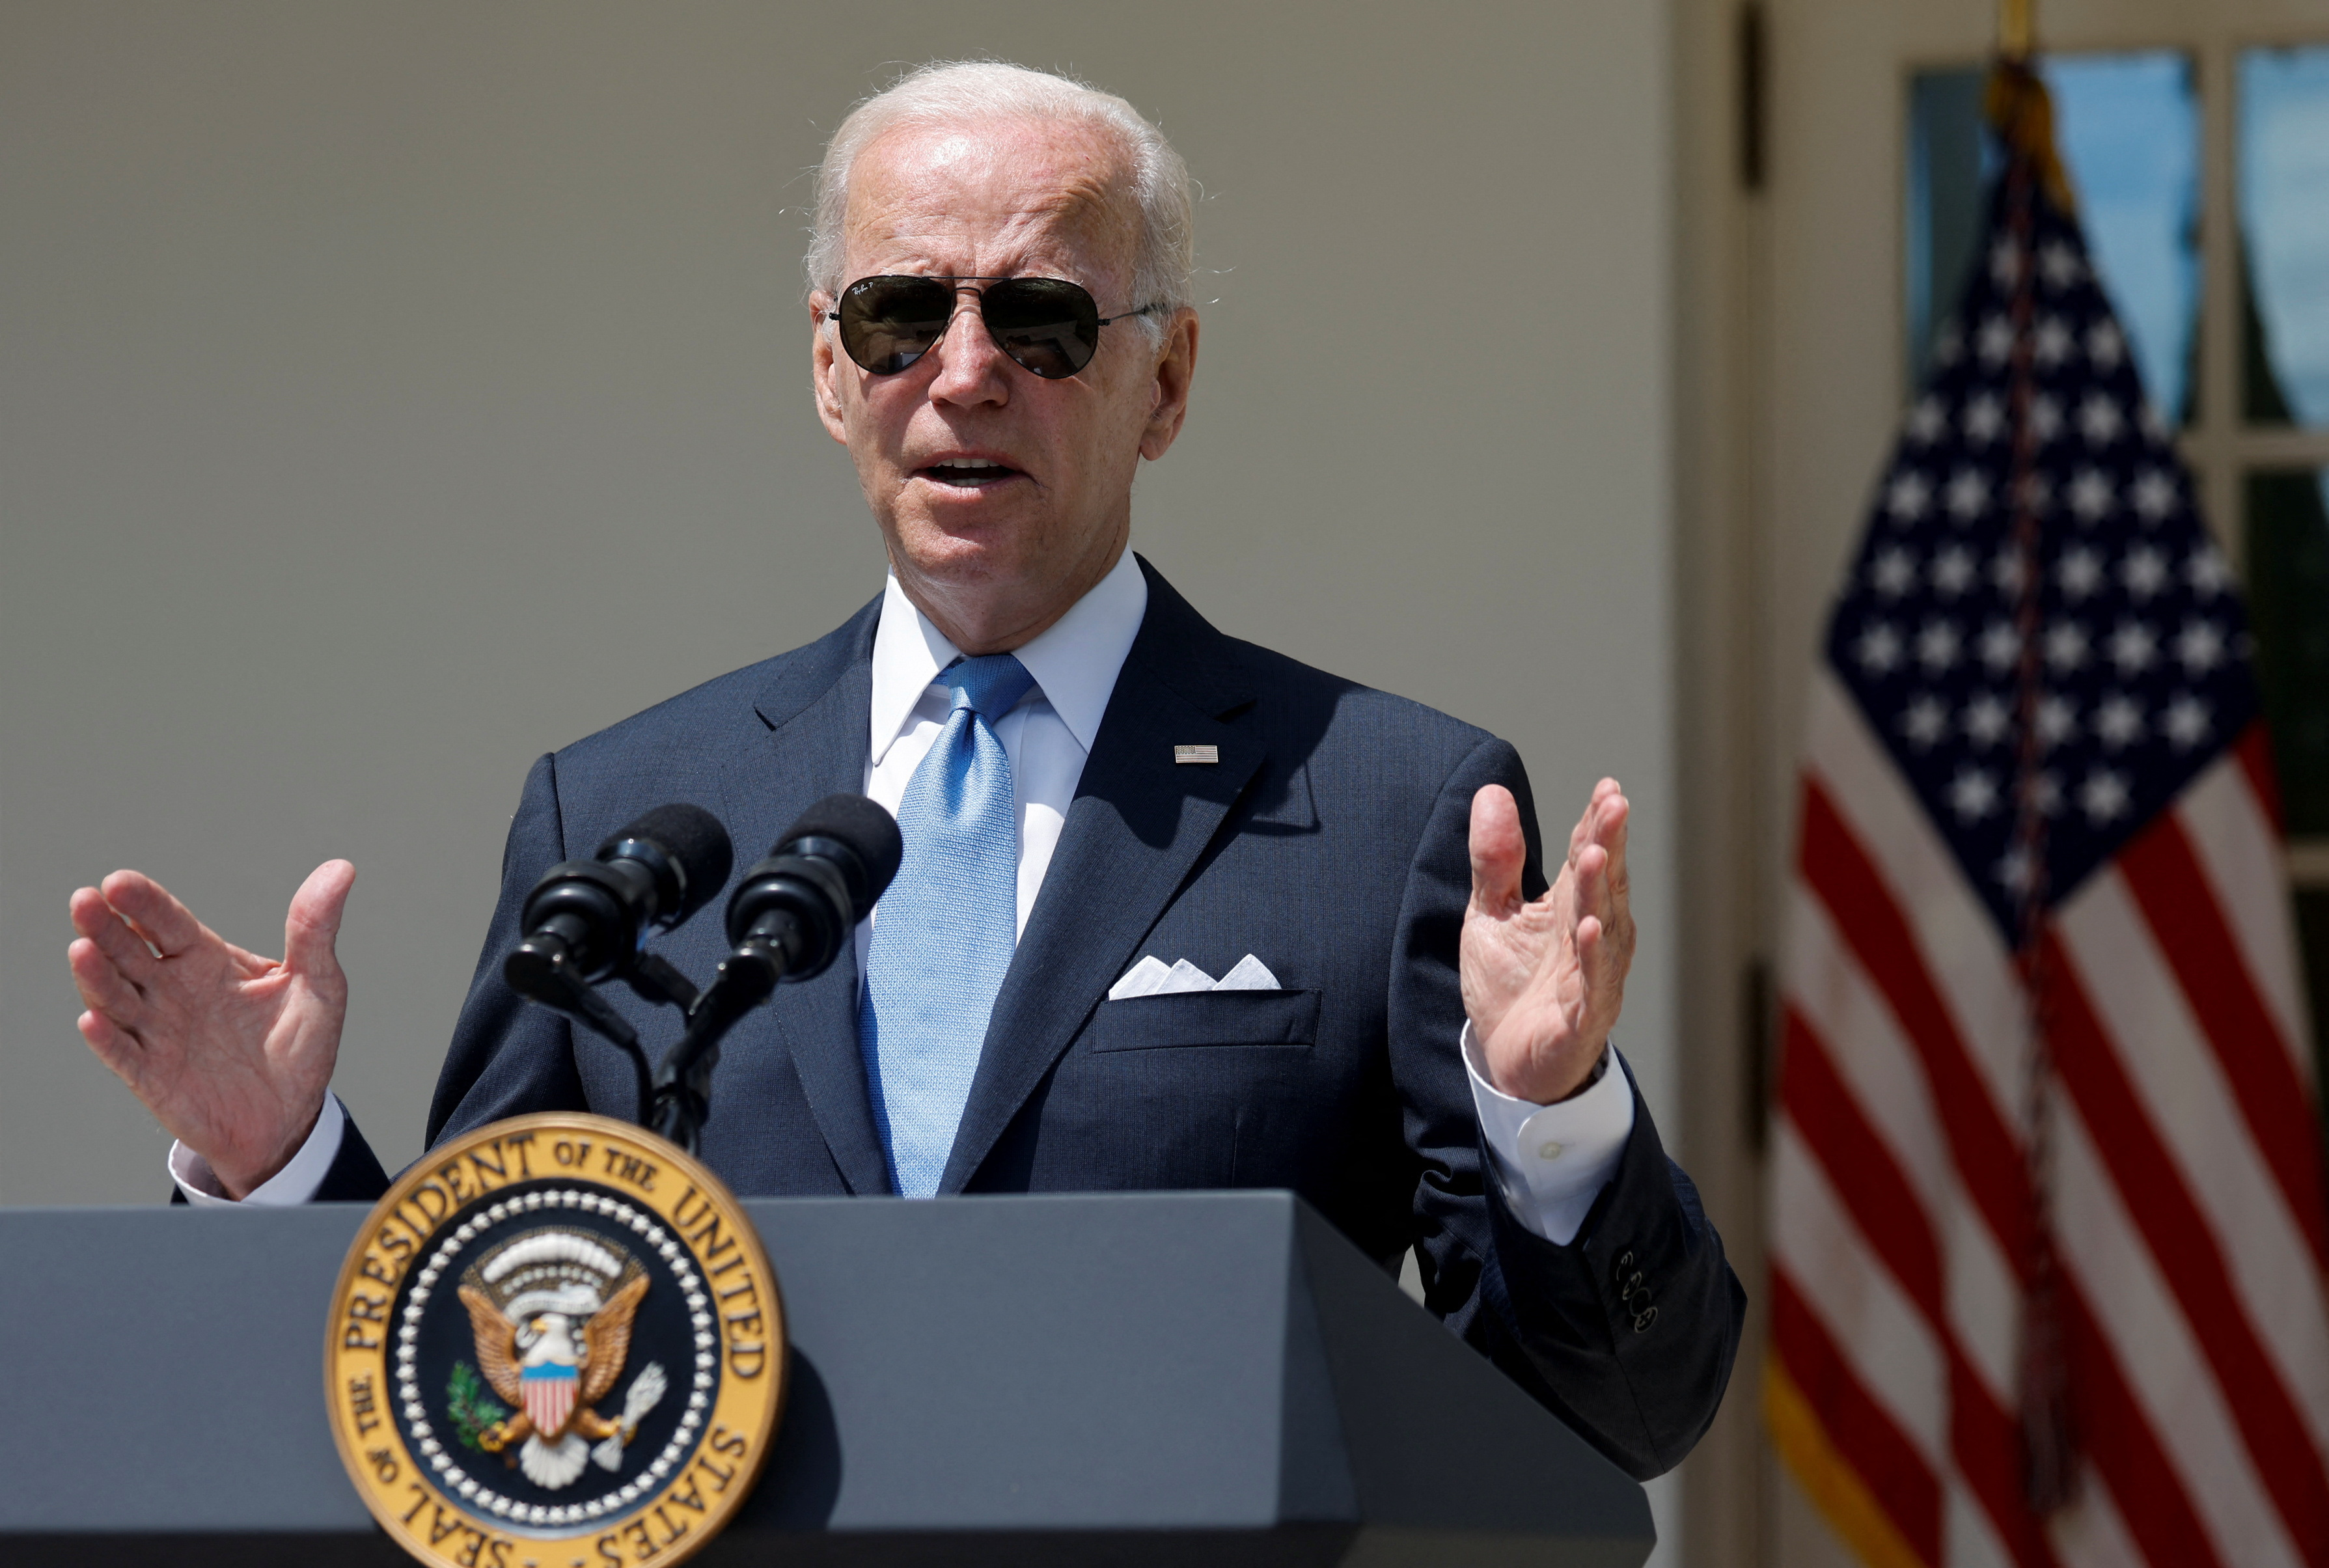 U.S. President Joe Biden delivers remarks in the Rose Garden at the White House